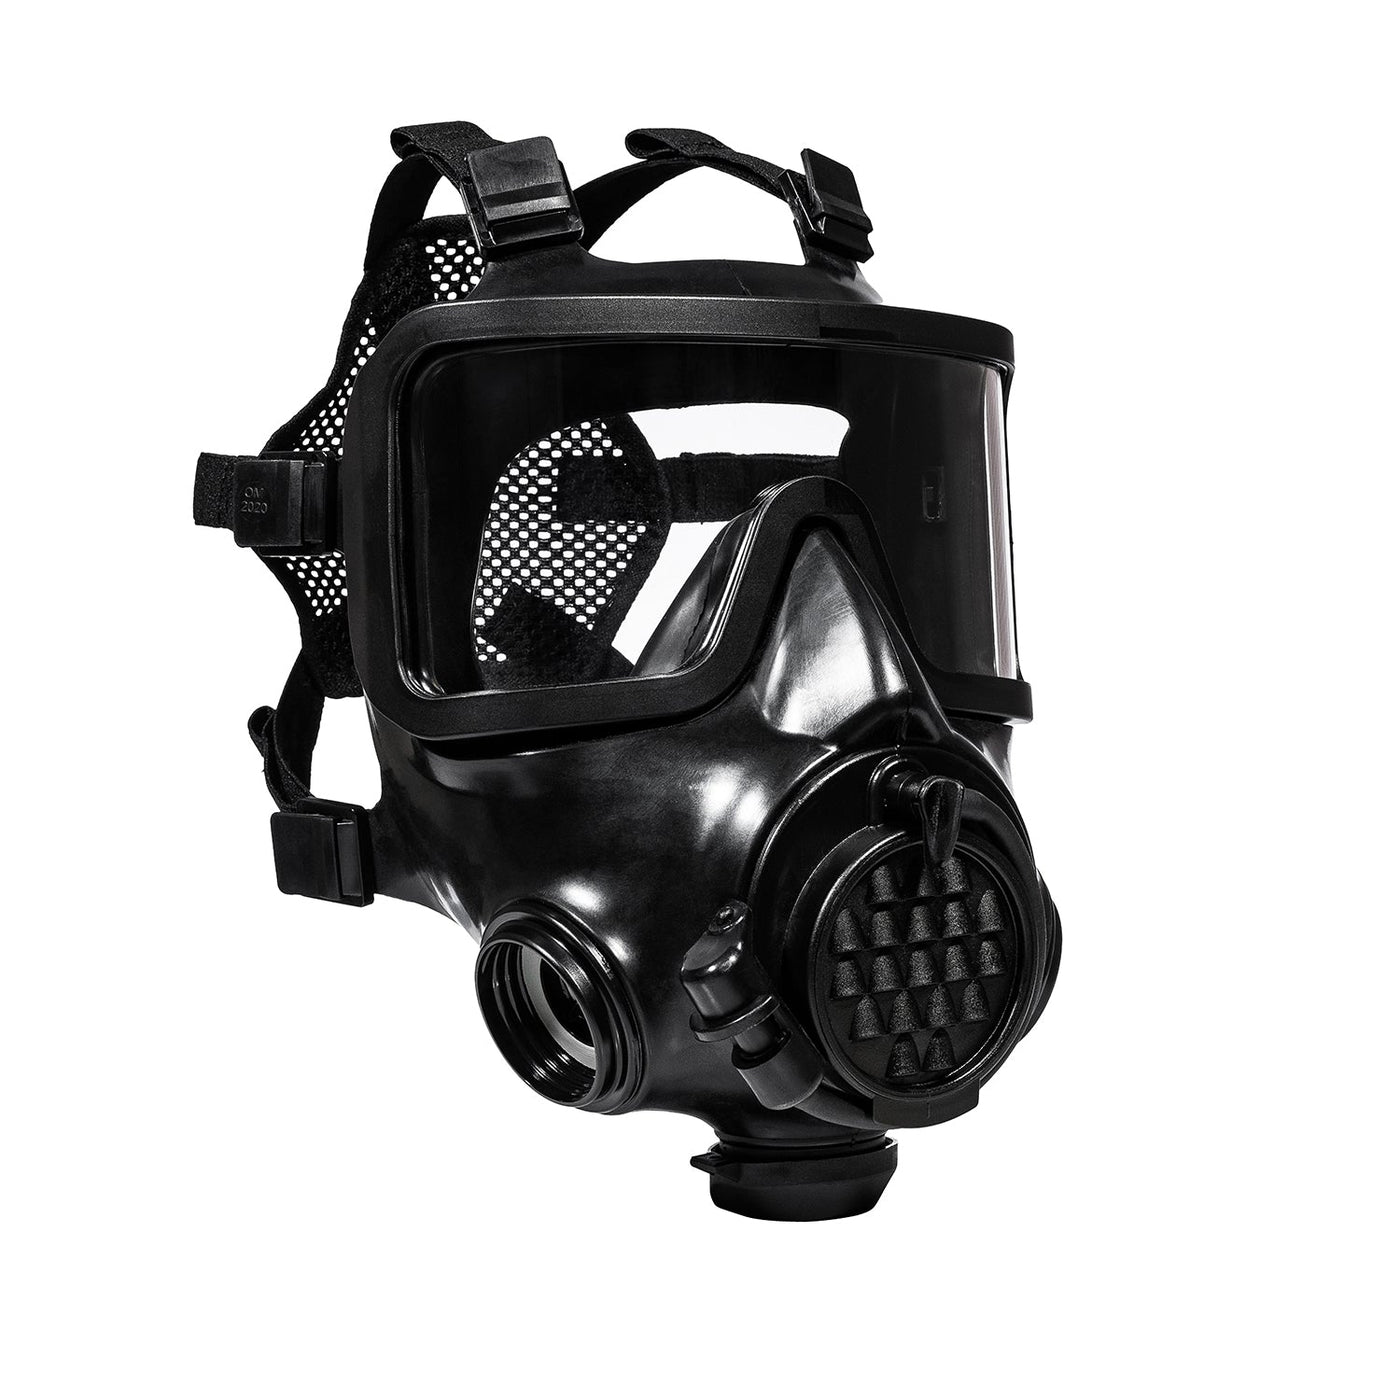 3/4 shot of the right side of the CM-8M gas mask